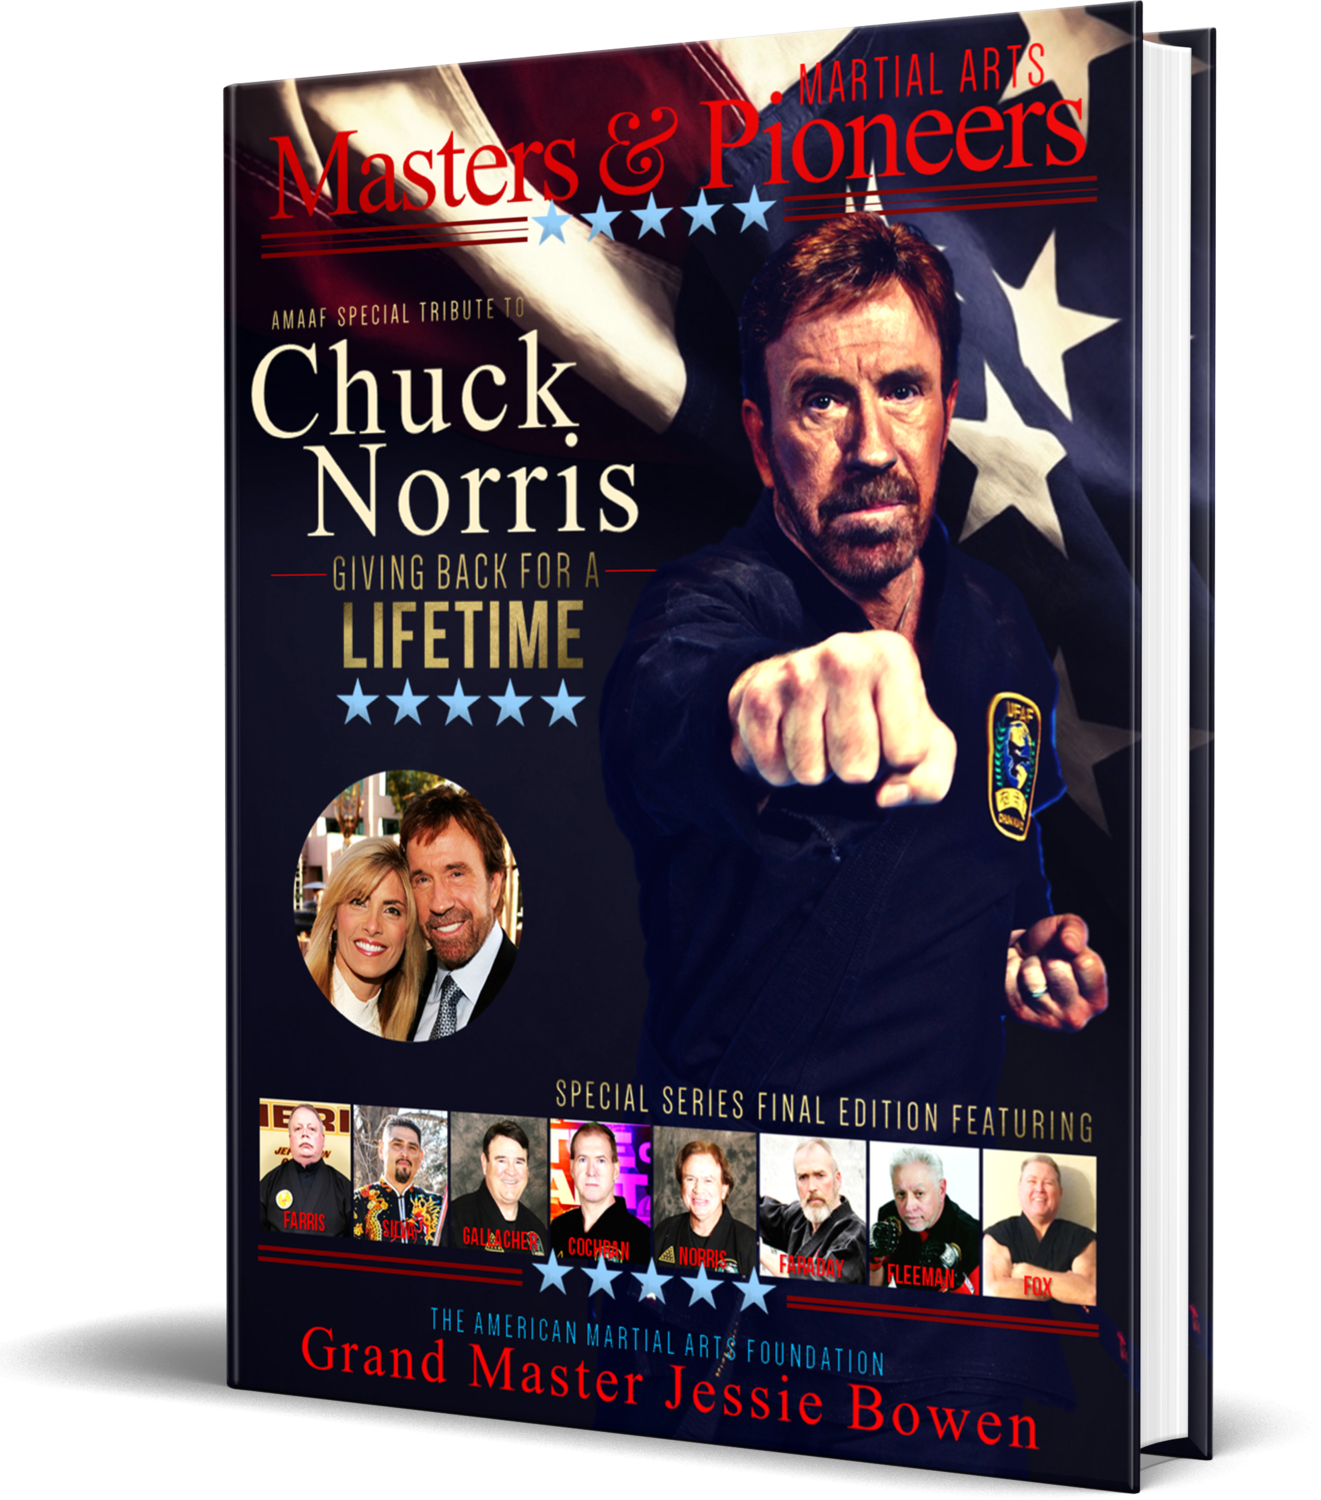 Martial Arts Masters & Pioneers Volume 3 Hardcover - Tribute to GM Chuck Norris